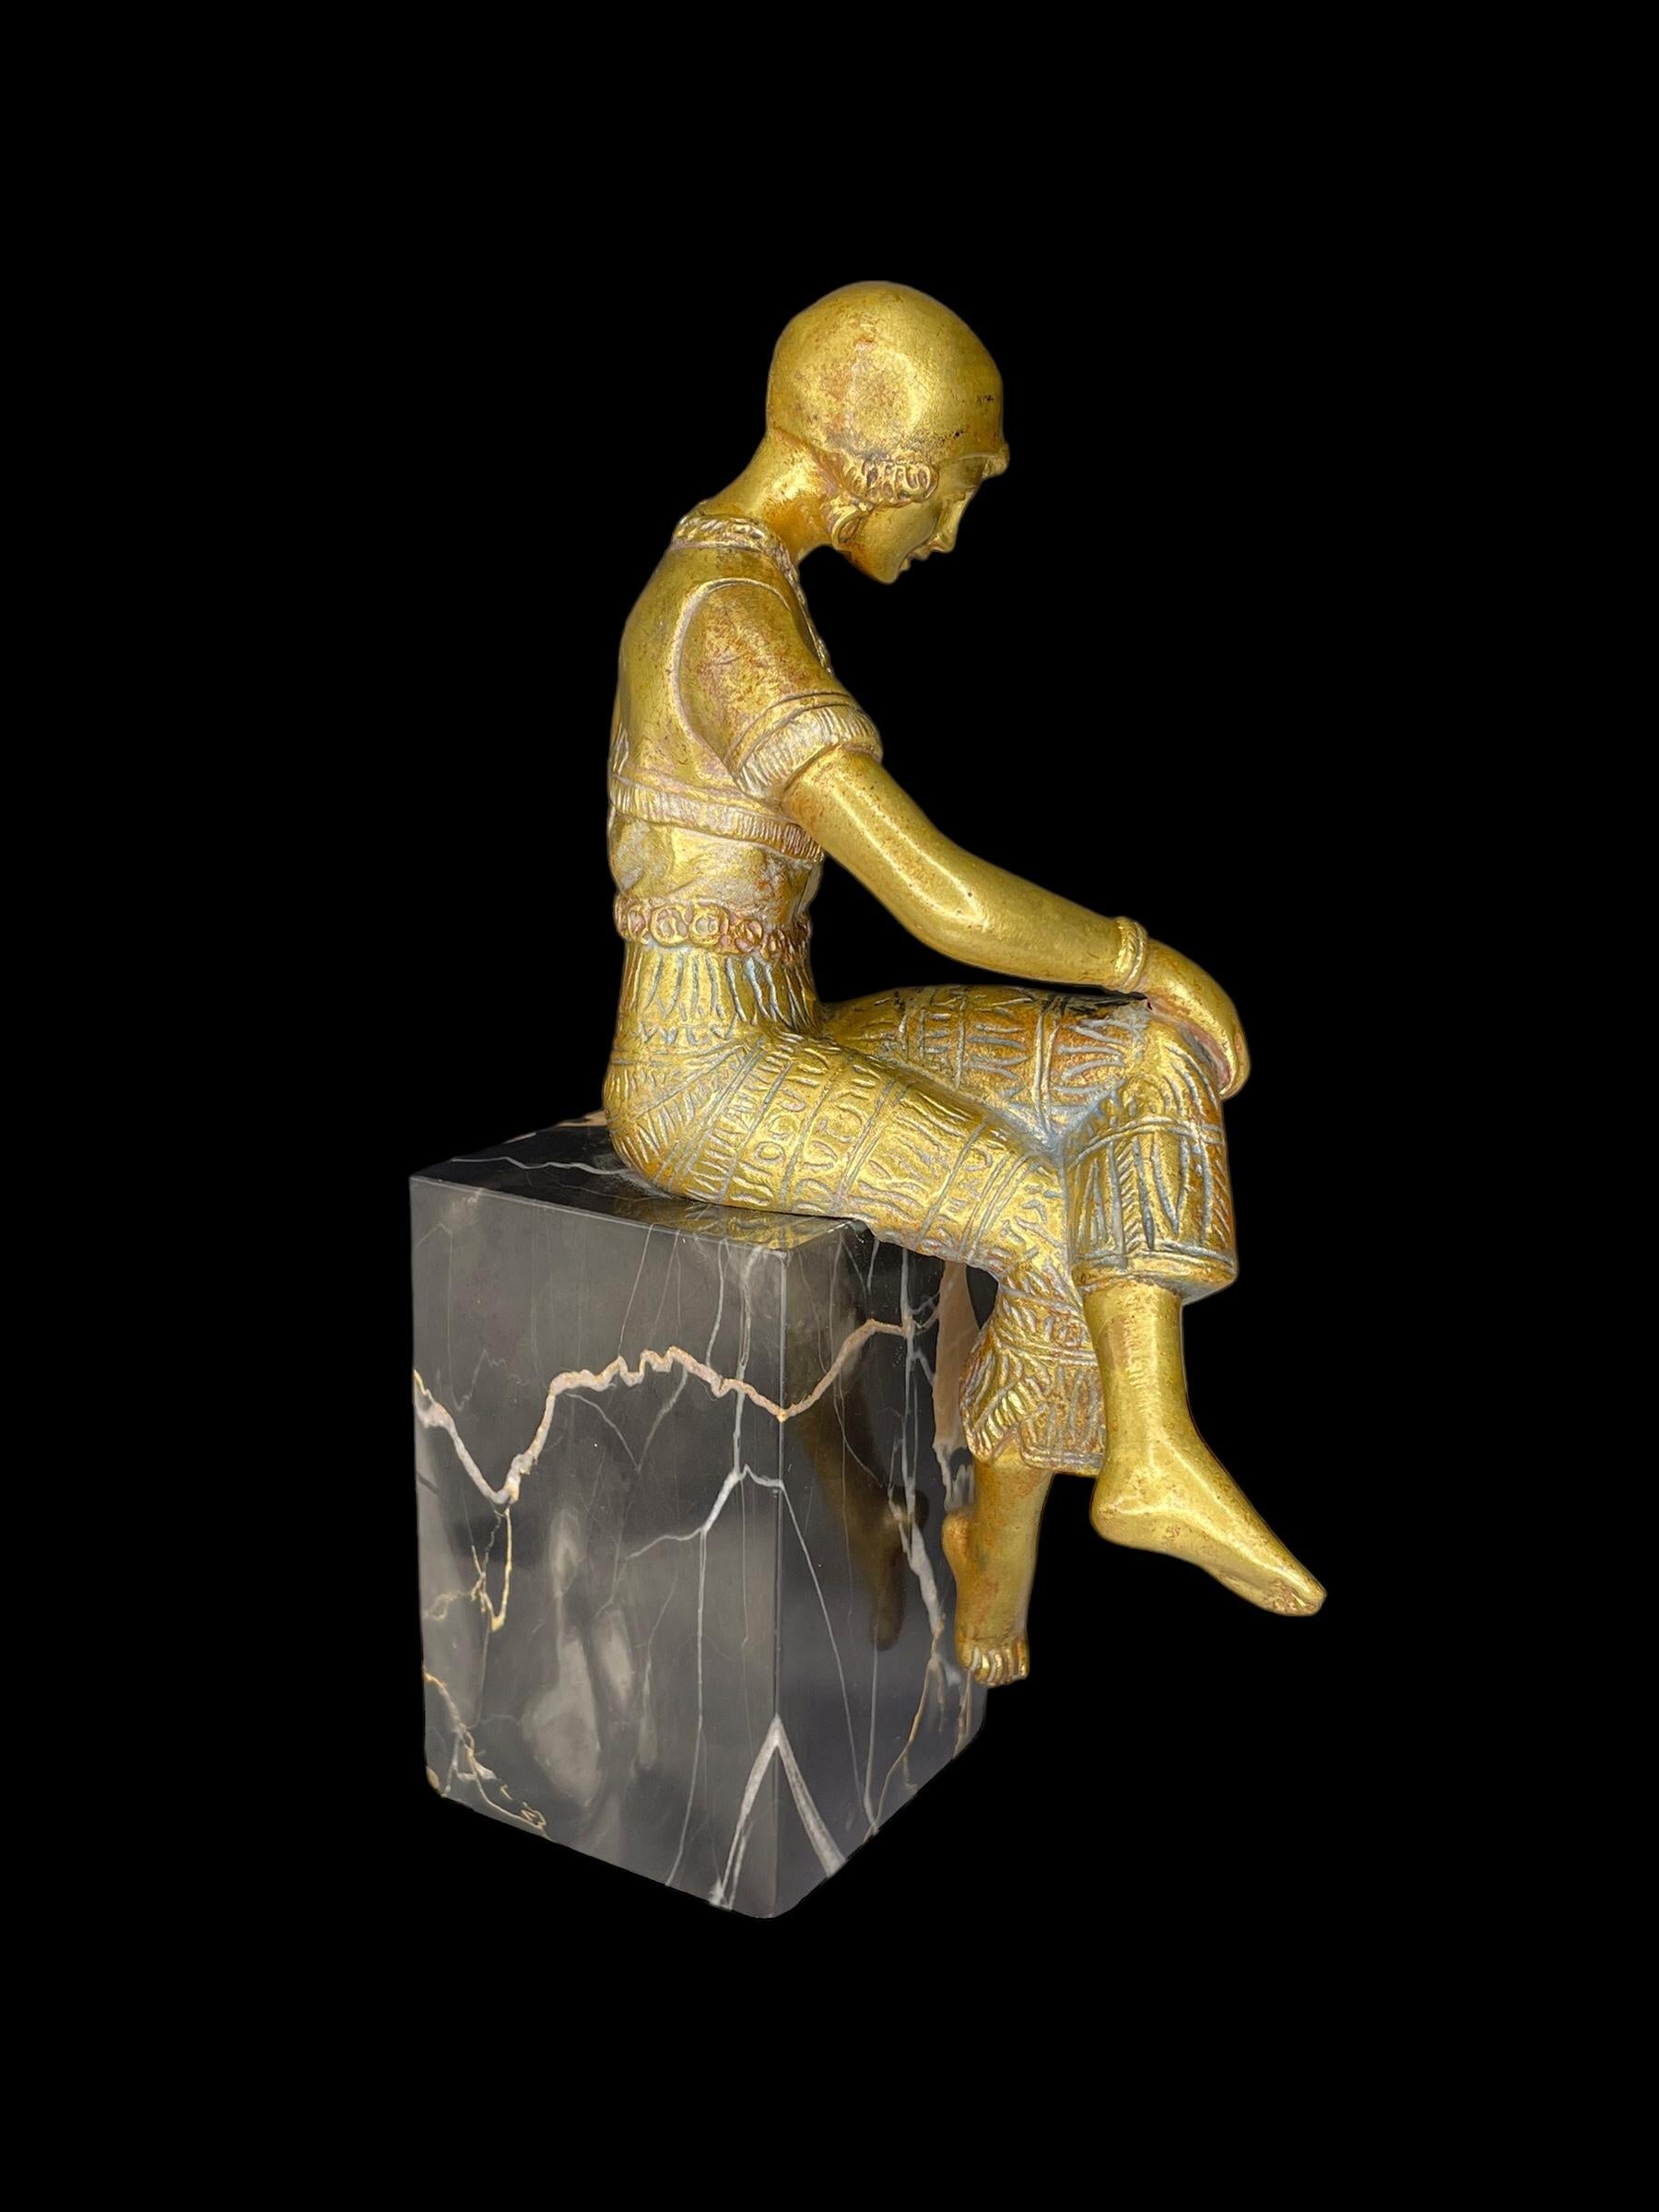 Art Deco Gilt Bronze Girl Signed ‘Jorel’, and mounted on it’s original Belgium portoro marble base.
The stylish young lady dressed in harem pants, the height of fashion at the time, inspired by the influence of the Middle East. Elegantly designed to